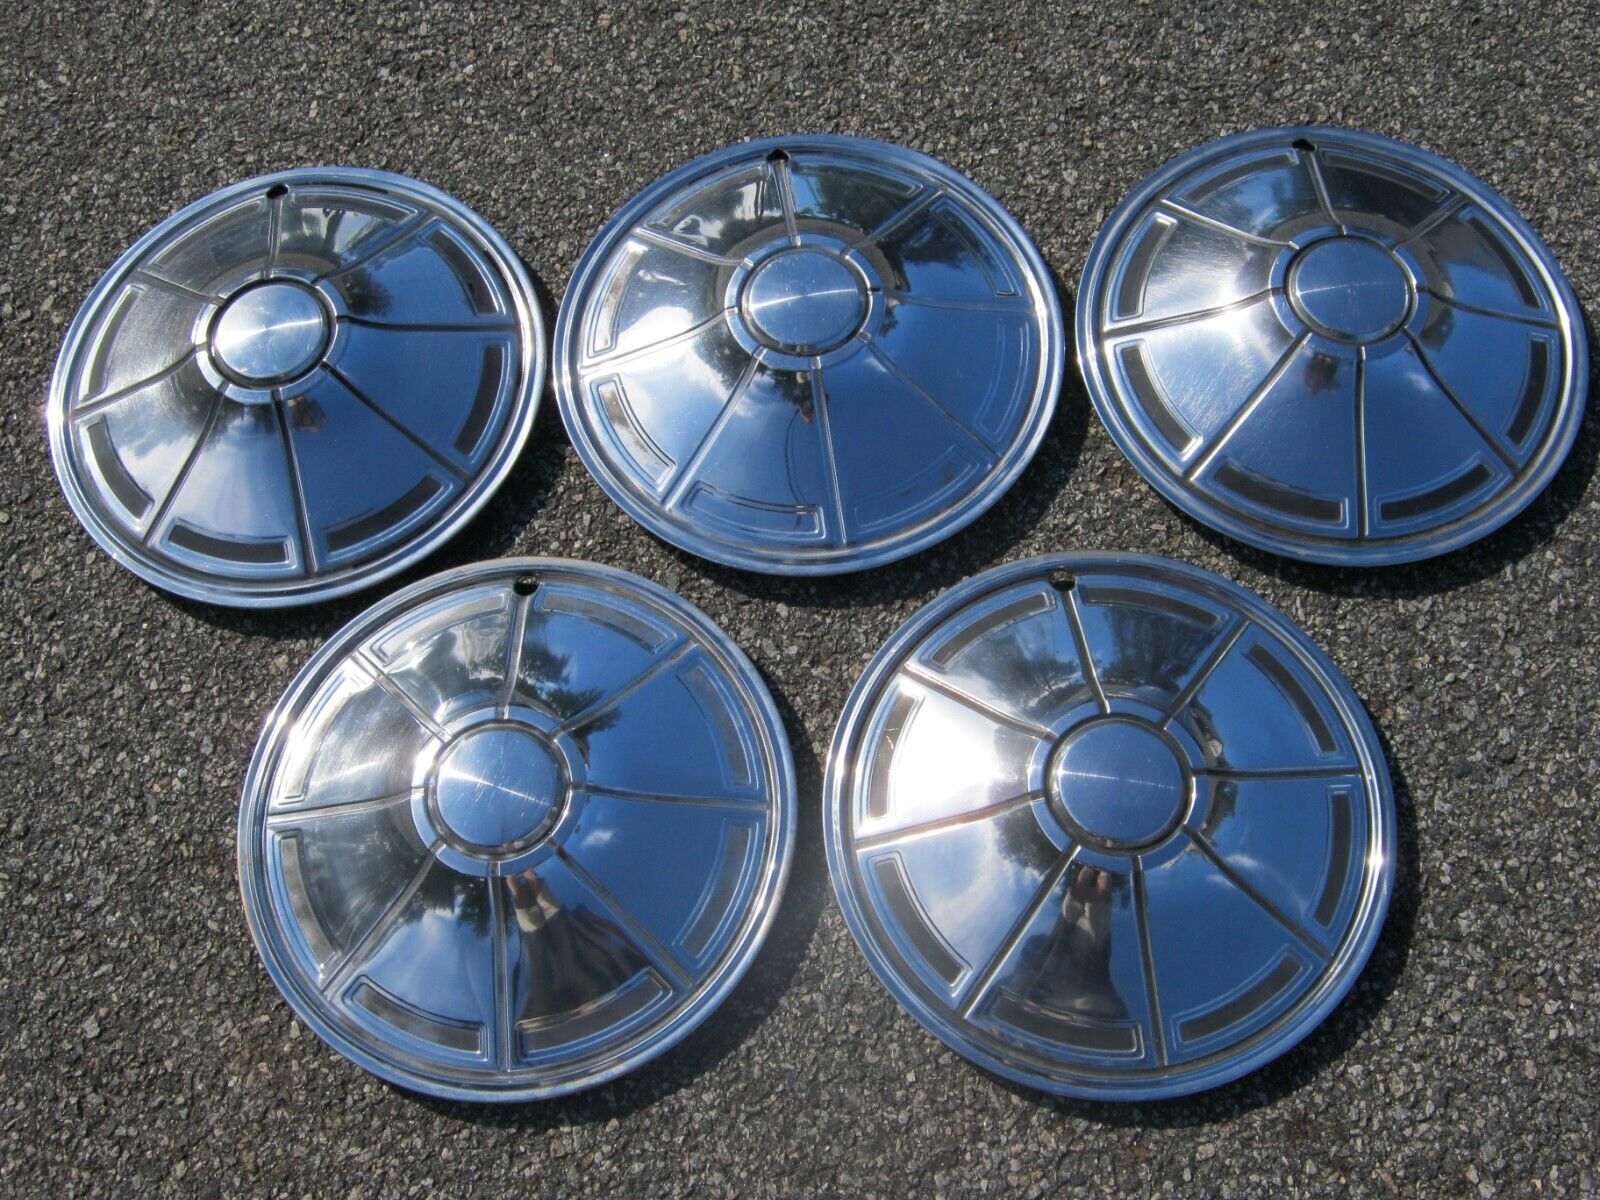 Genuine 1973 to 1976 Plymouth Duster Valiant 14 inch hubcaps wheel covers